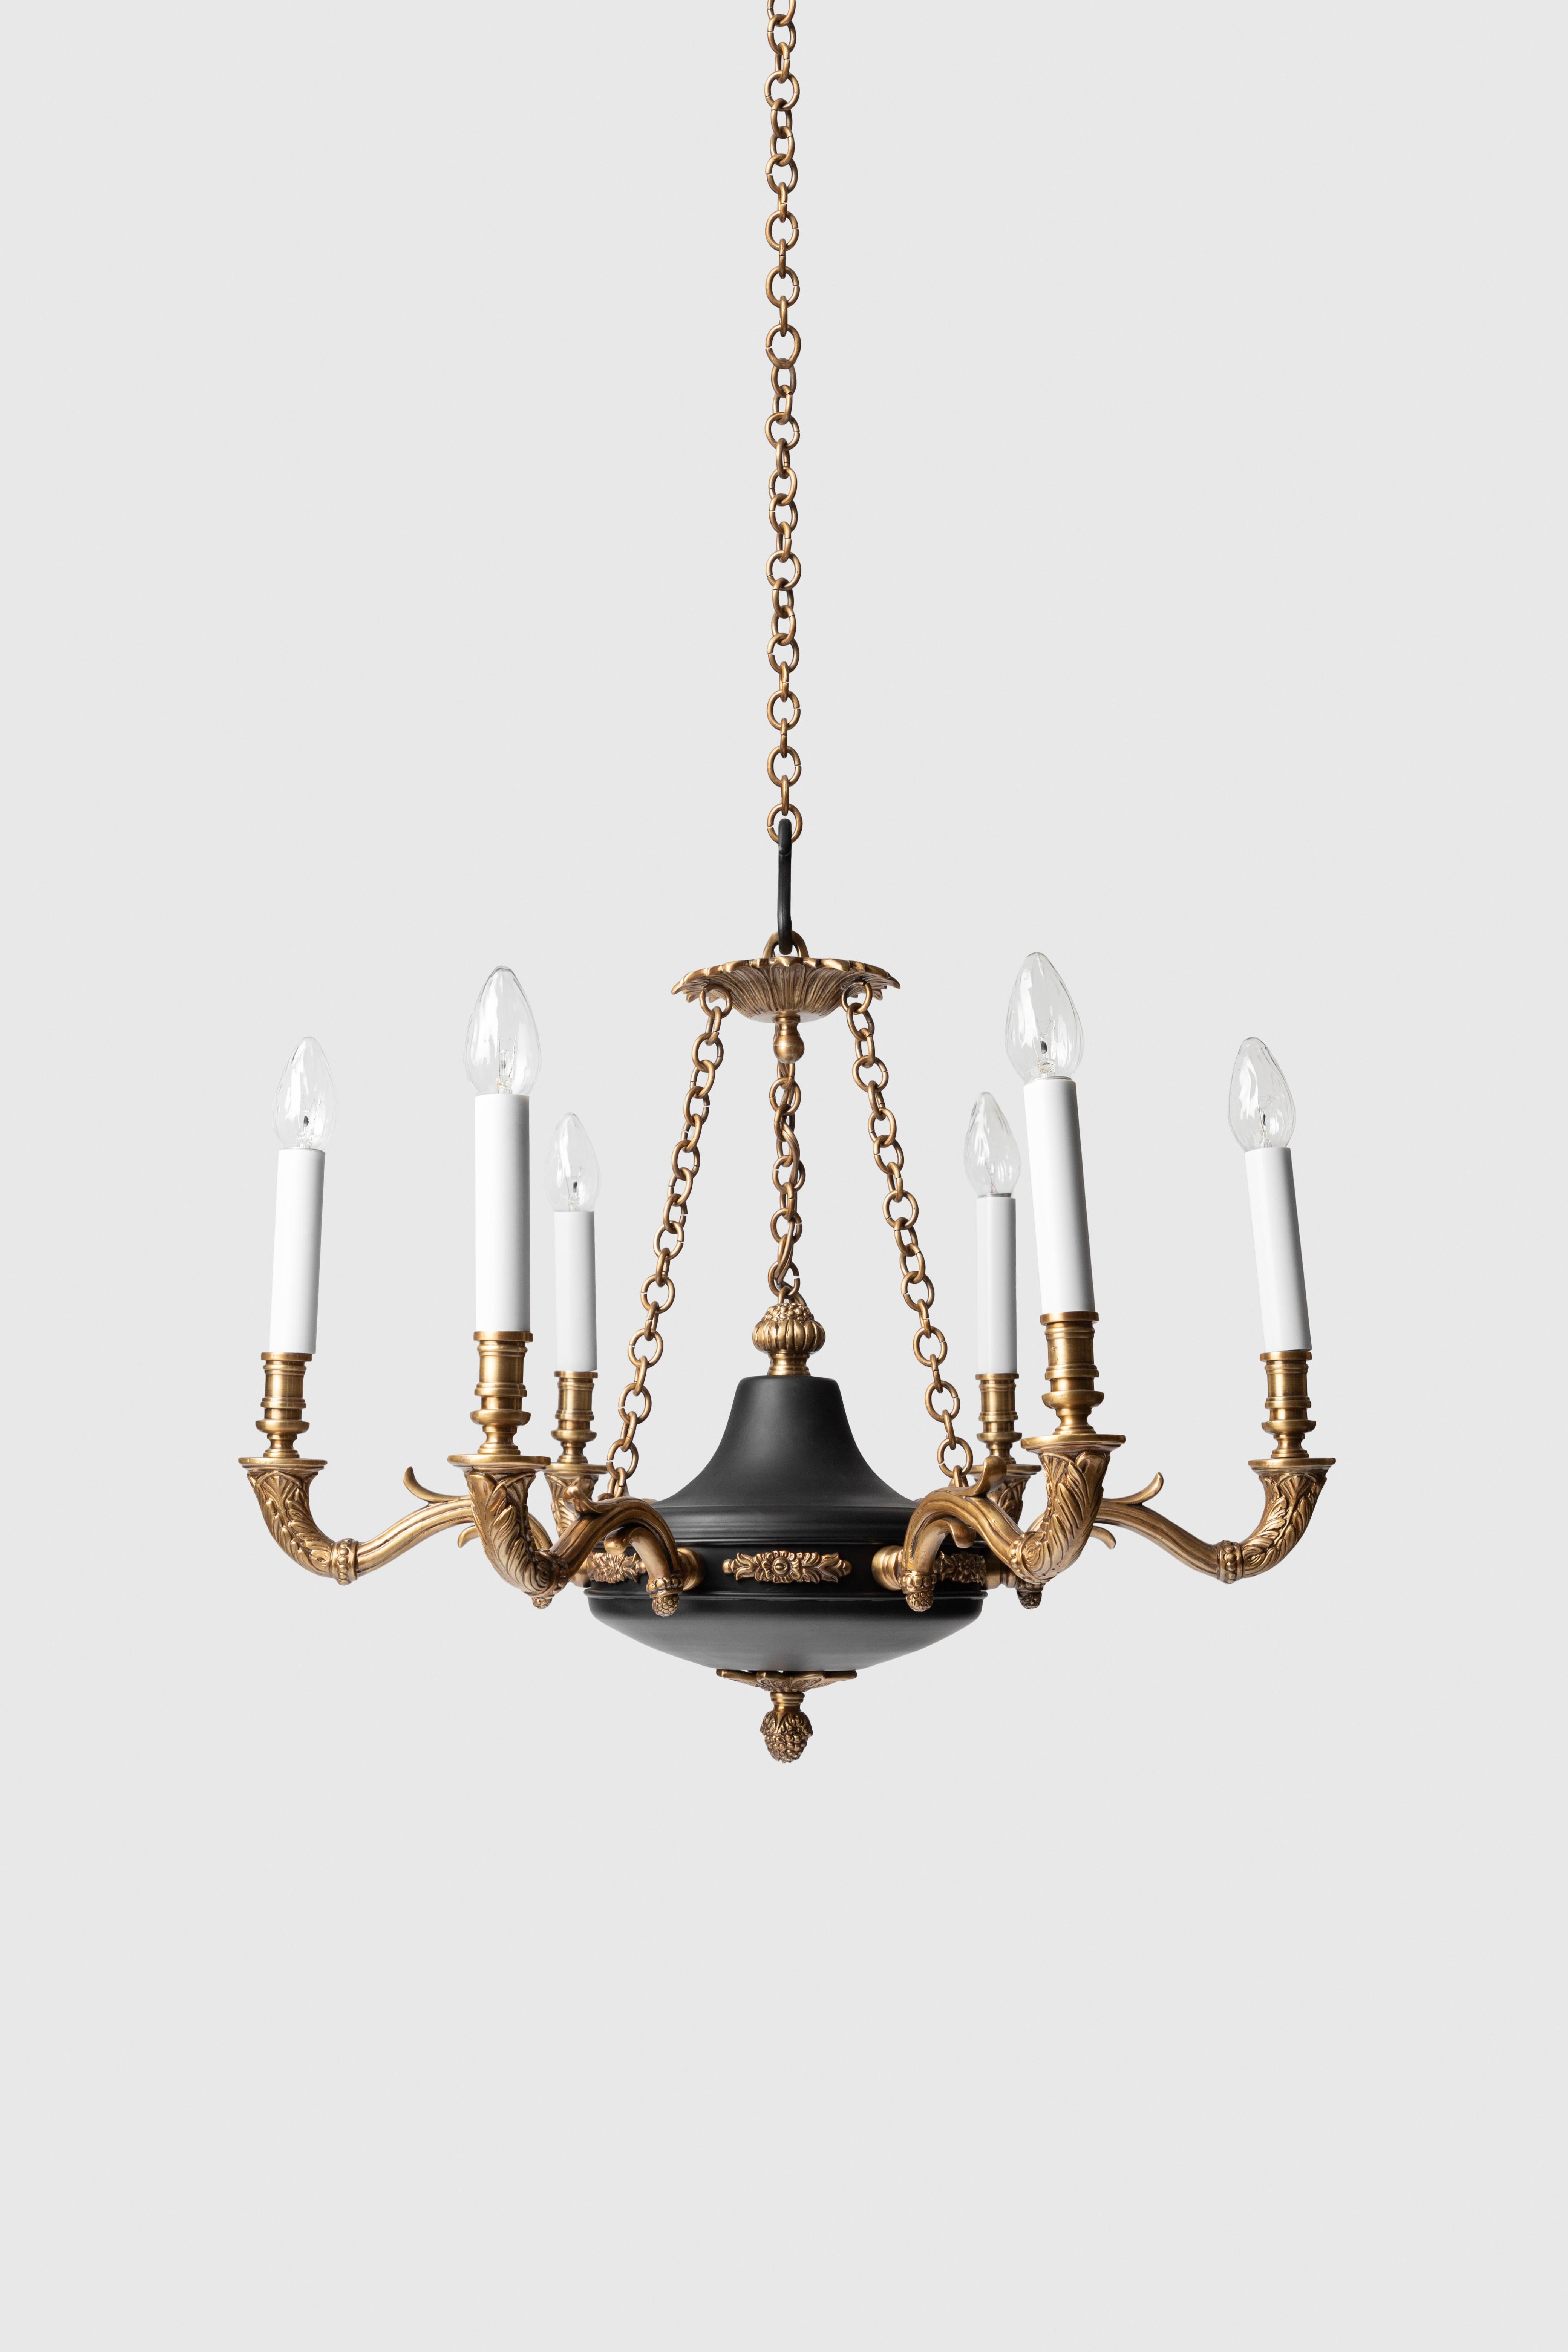 Six light chandelier made in bronze with black and gold finish. Acorn details in gold.